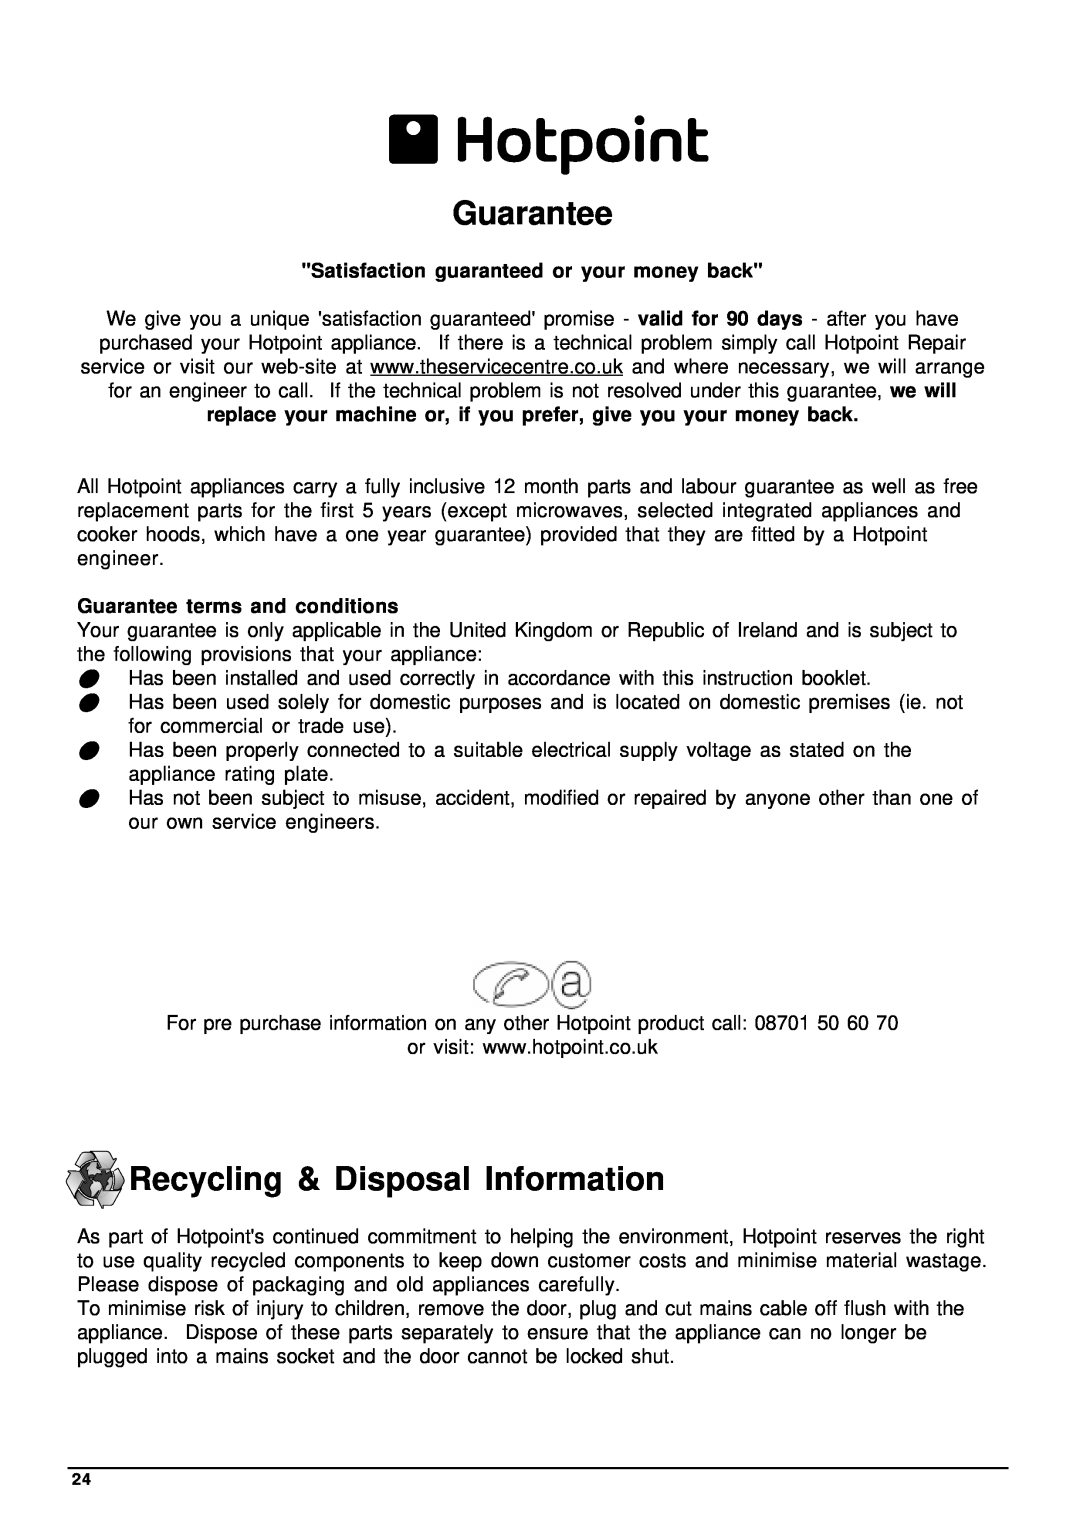 Hotpoint FDW65, FDW60 manual Guarantee, Recycling & Disposal Information, Satisfaction guaranteed or your money back 